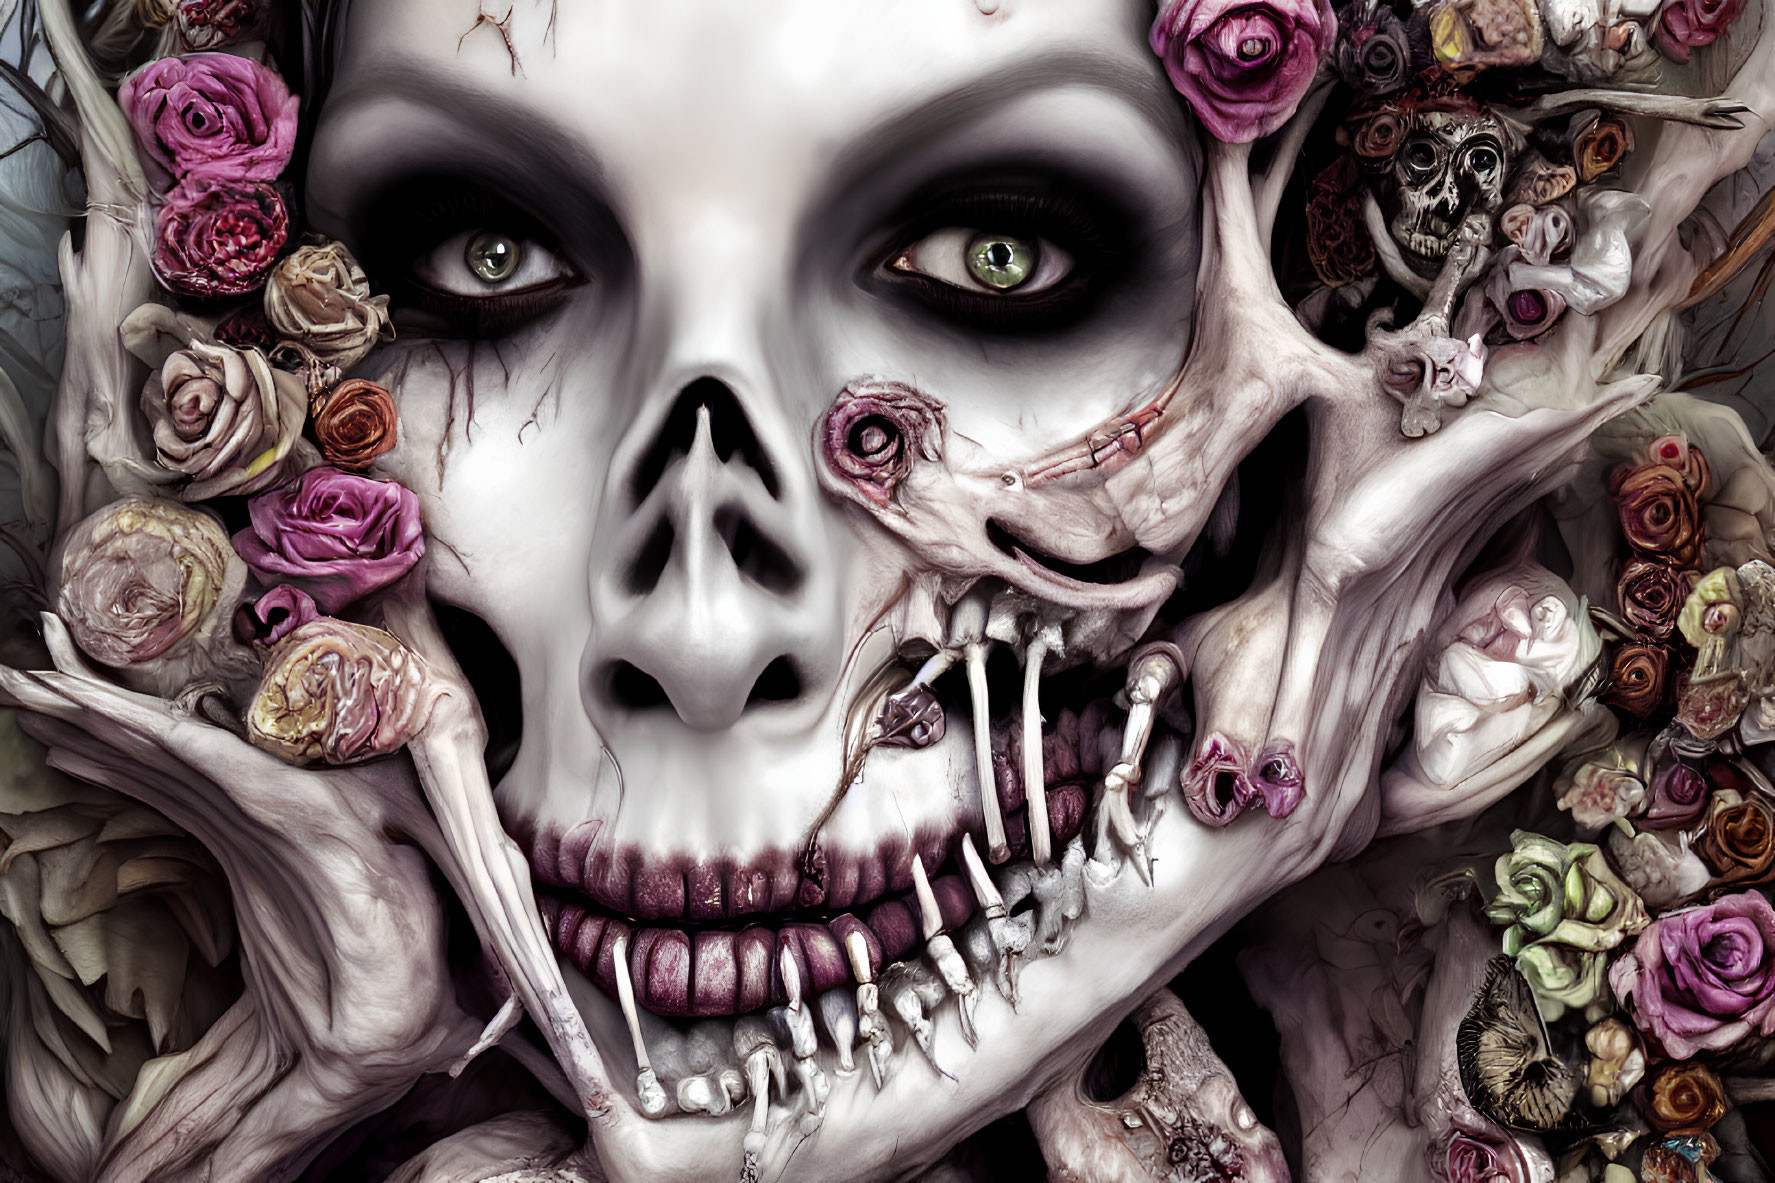 Detailed Artwork: Skeletal Figure with Menacing Eyes Surrounded by Colorful Roses